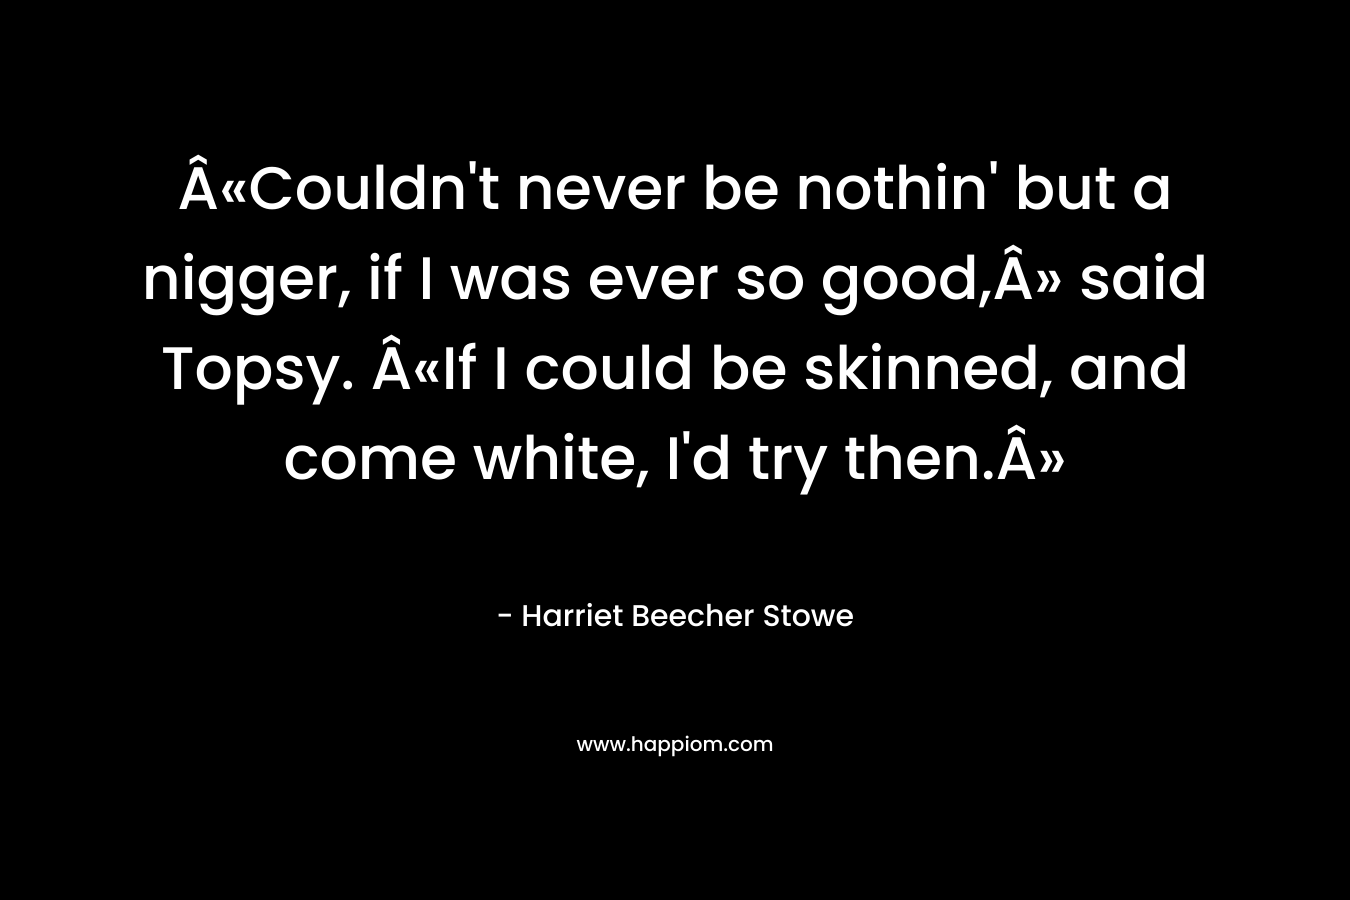 Â«Couldn’t never be nothin’ but a nigger, if I was ever so good,Â» said Topsy. Â«If I could be skinned, and come white, I’d try then.Â» – Harriet Beecher Stowe